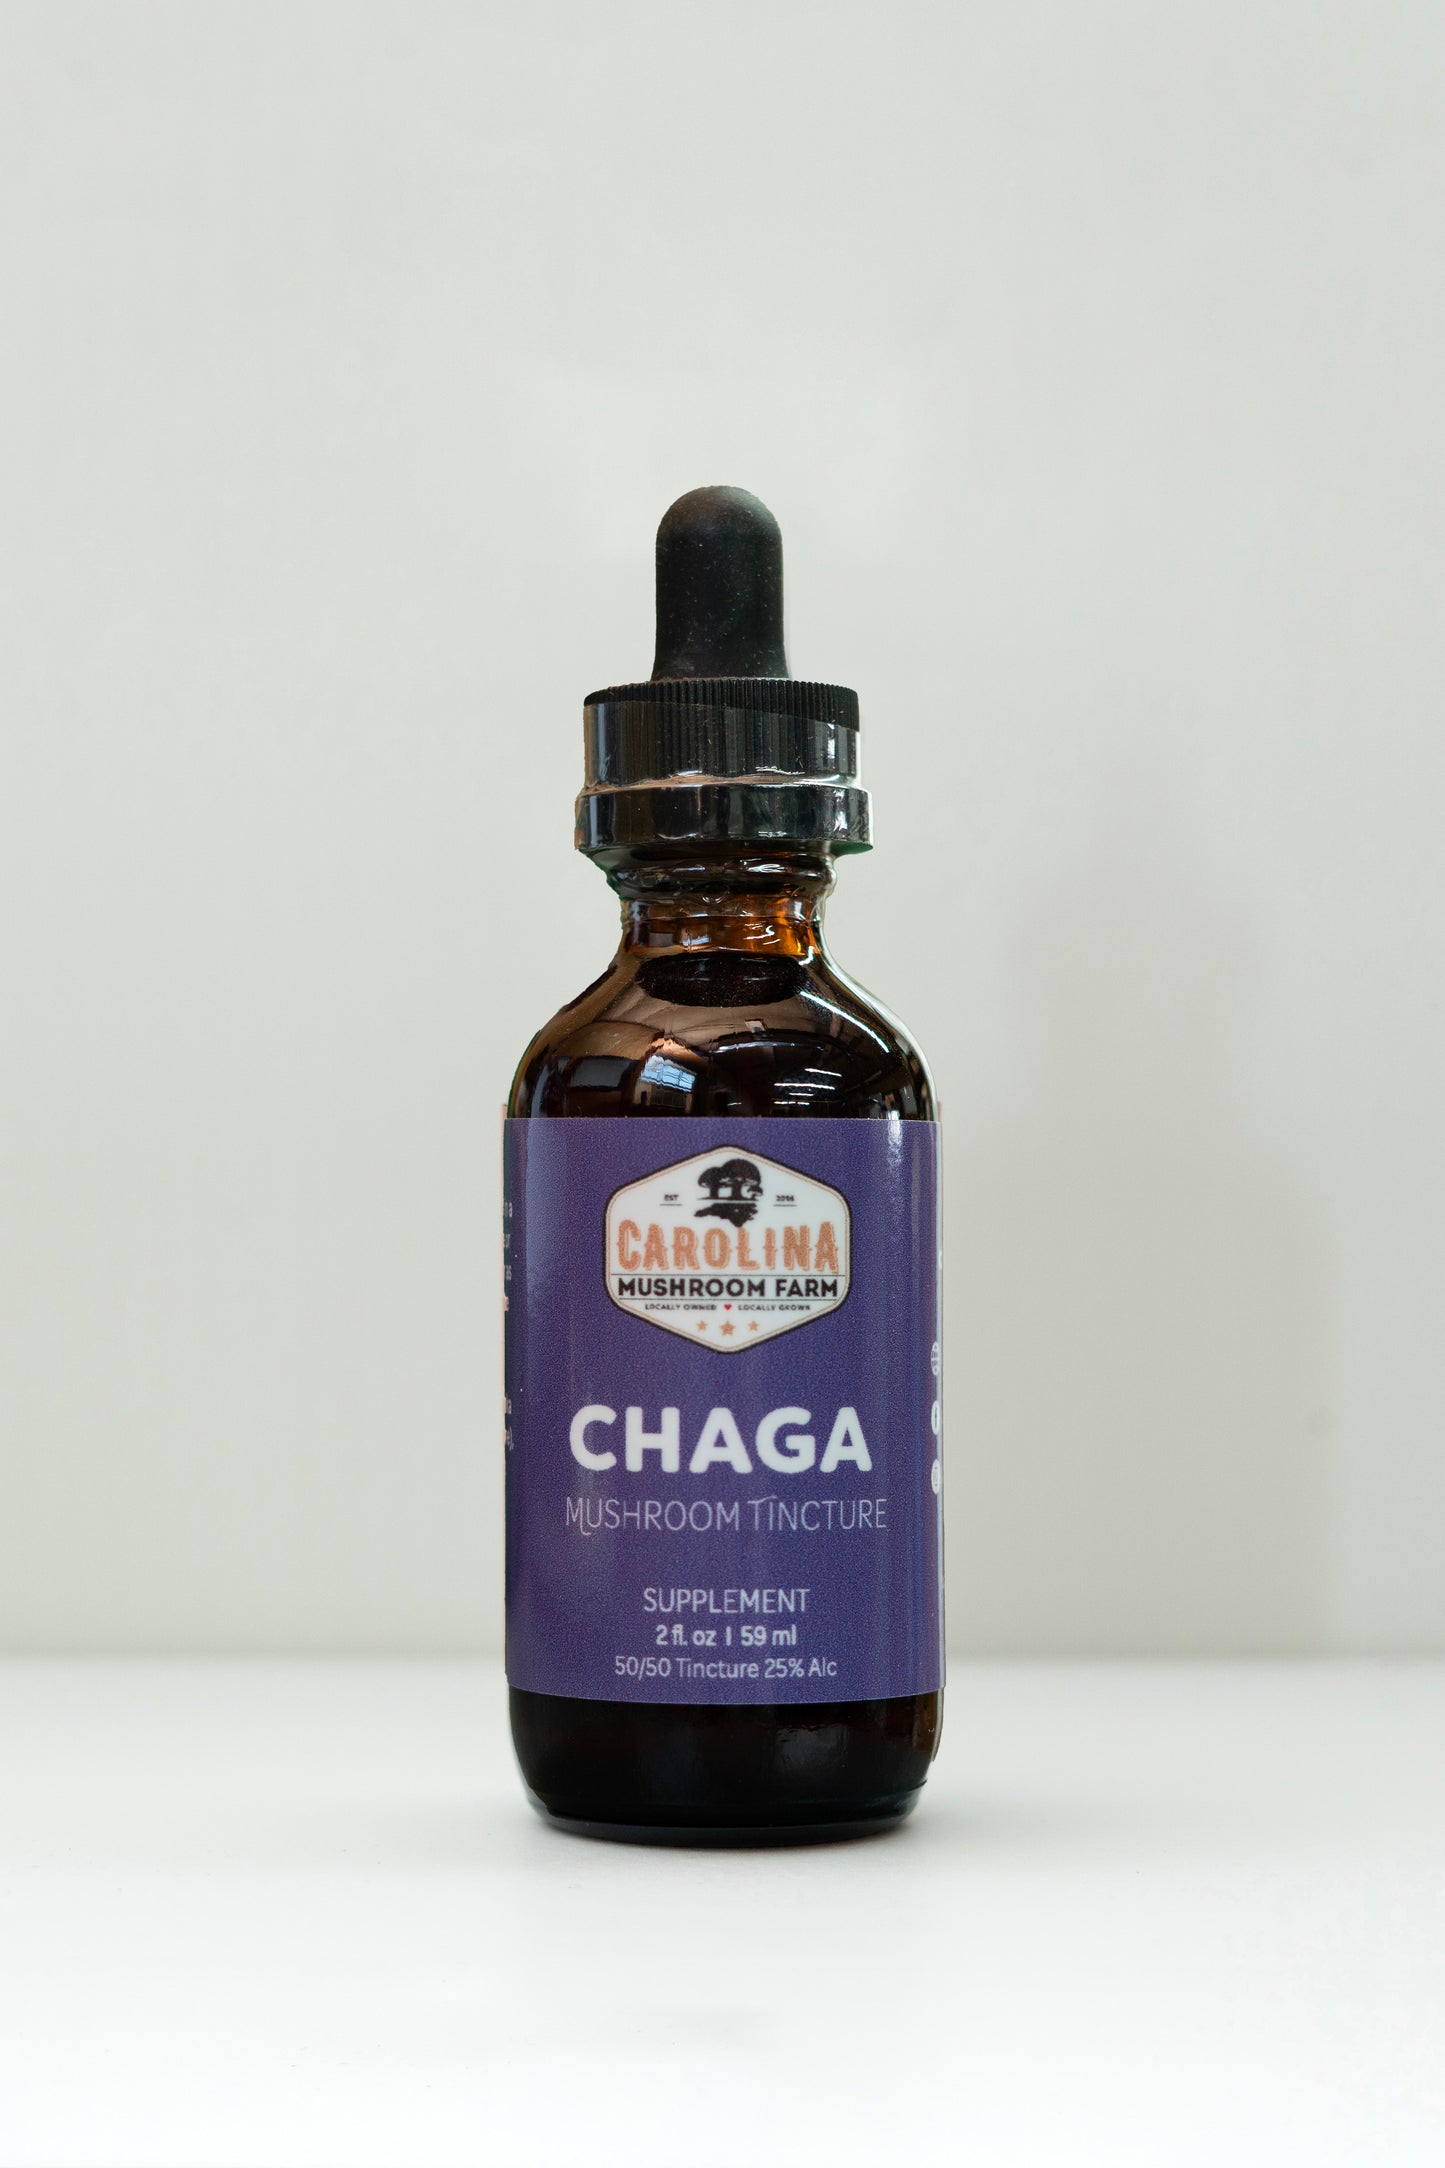 Chaga - Boost immune system and reduce inflammation